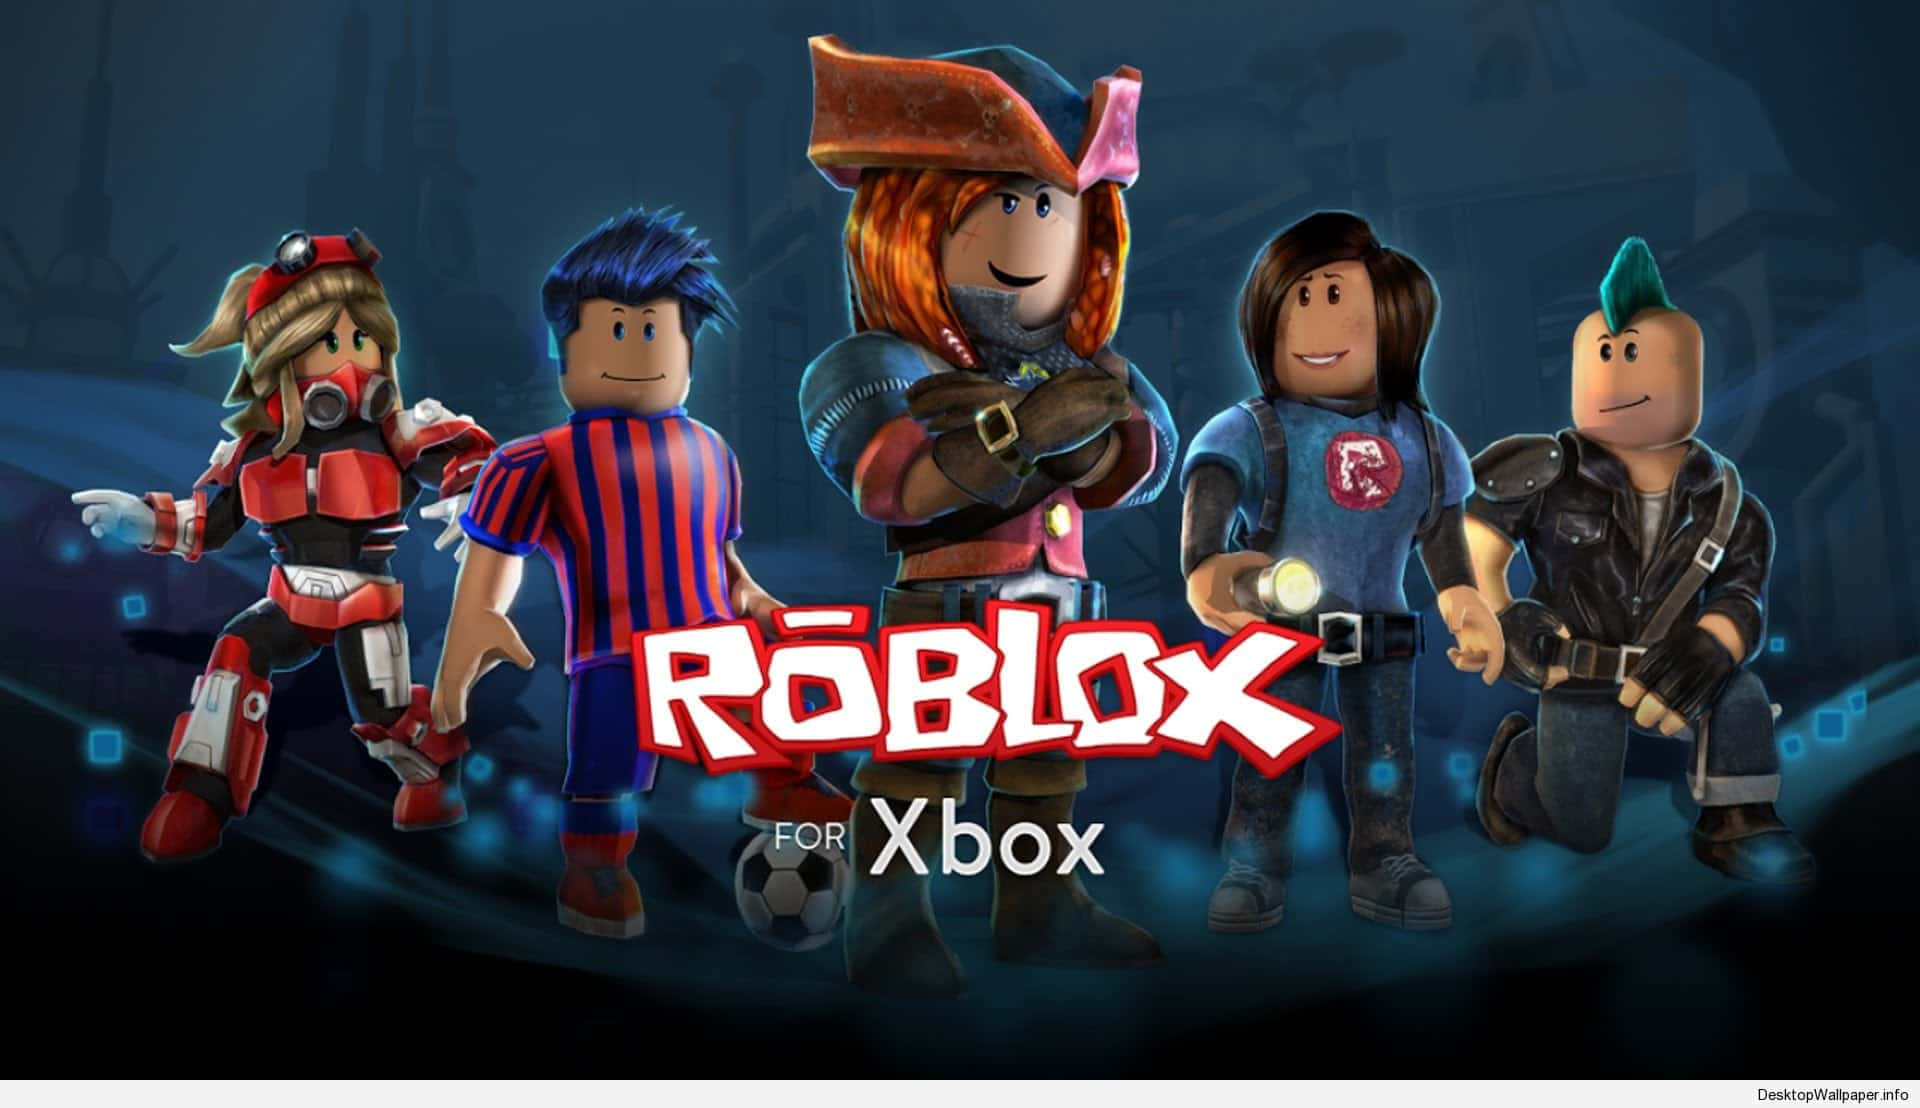 Welcome to the world of Roblox! Wallpaper